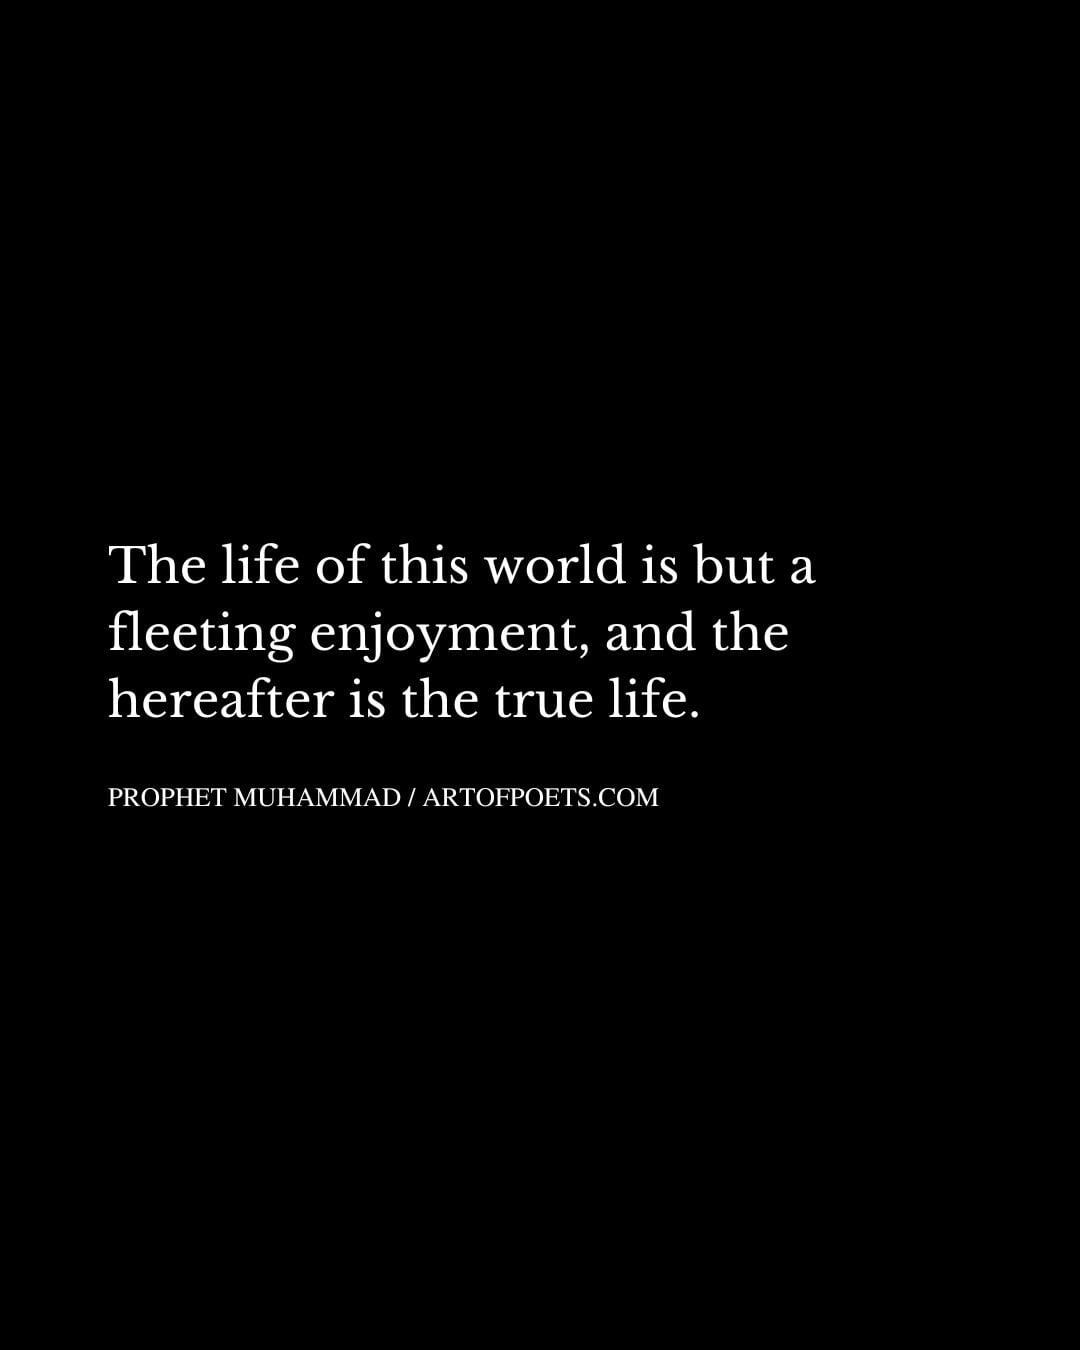 The life of this world is but a fleeting enjoyment and the hereafter is the true life